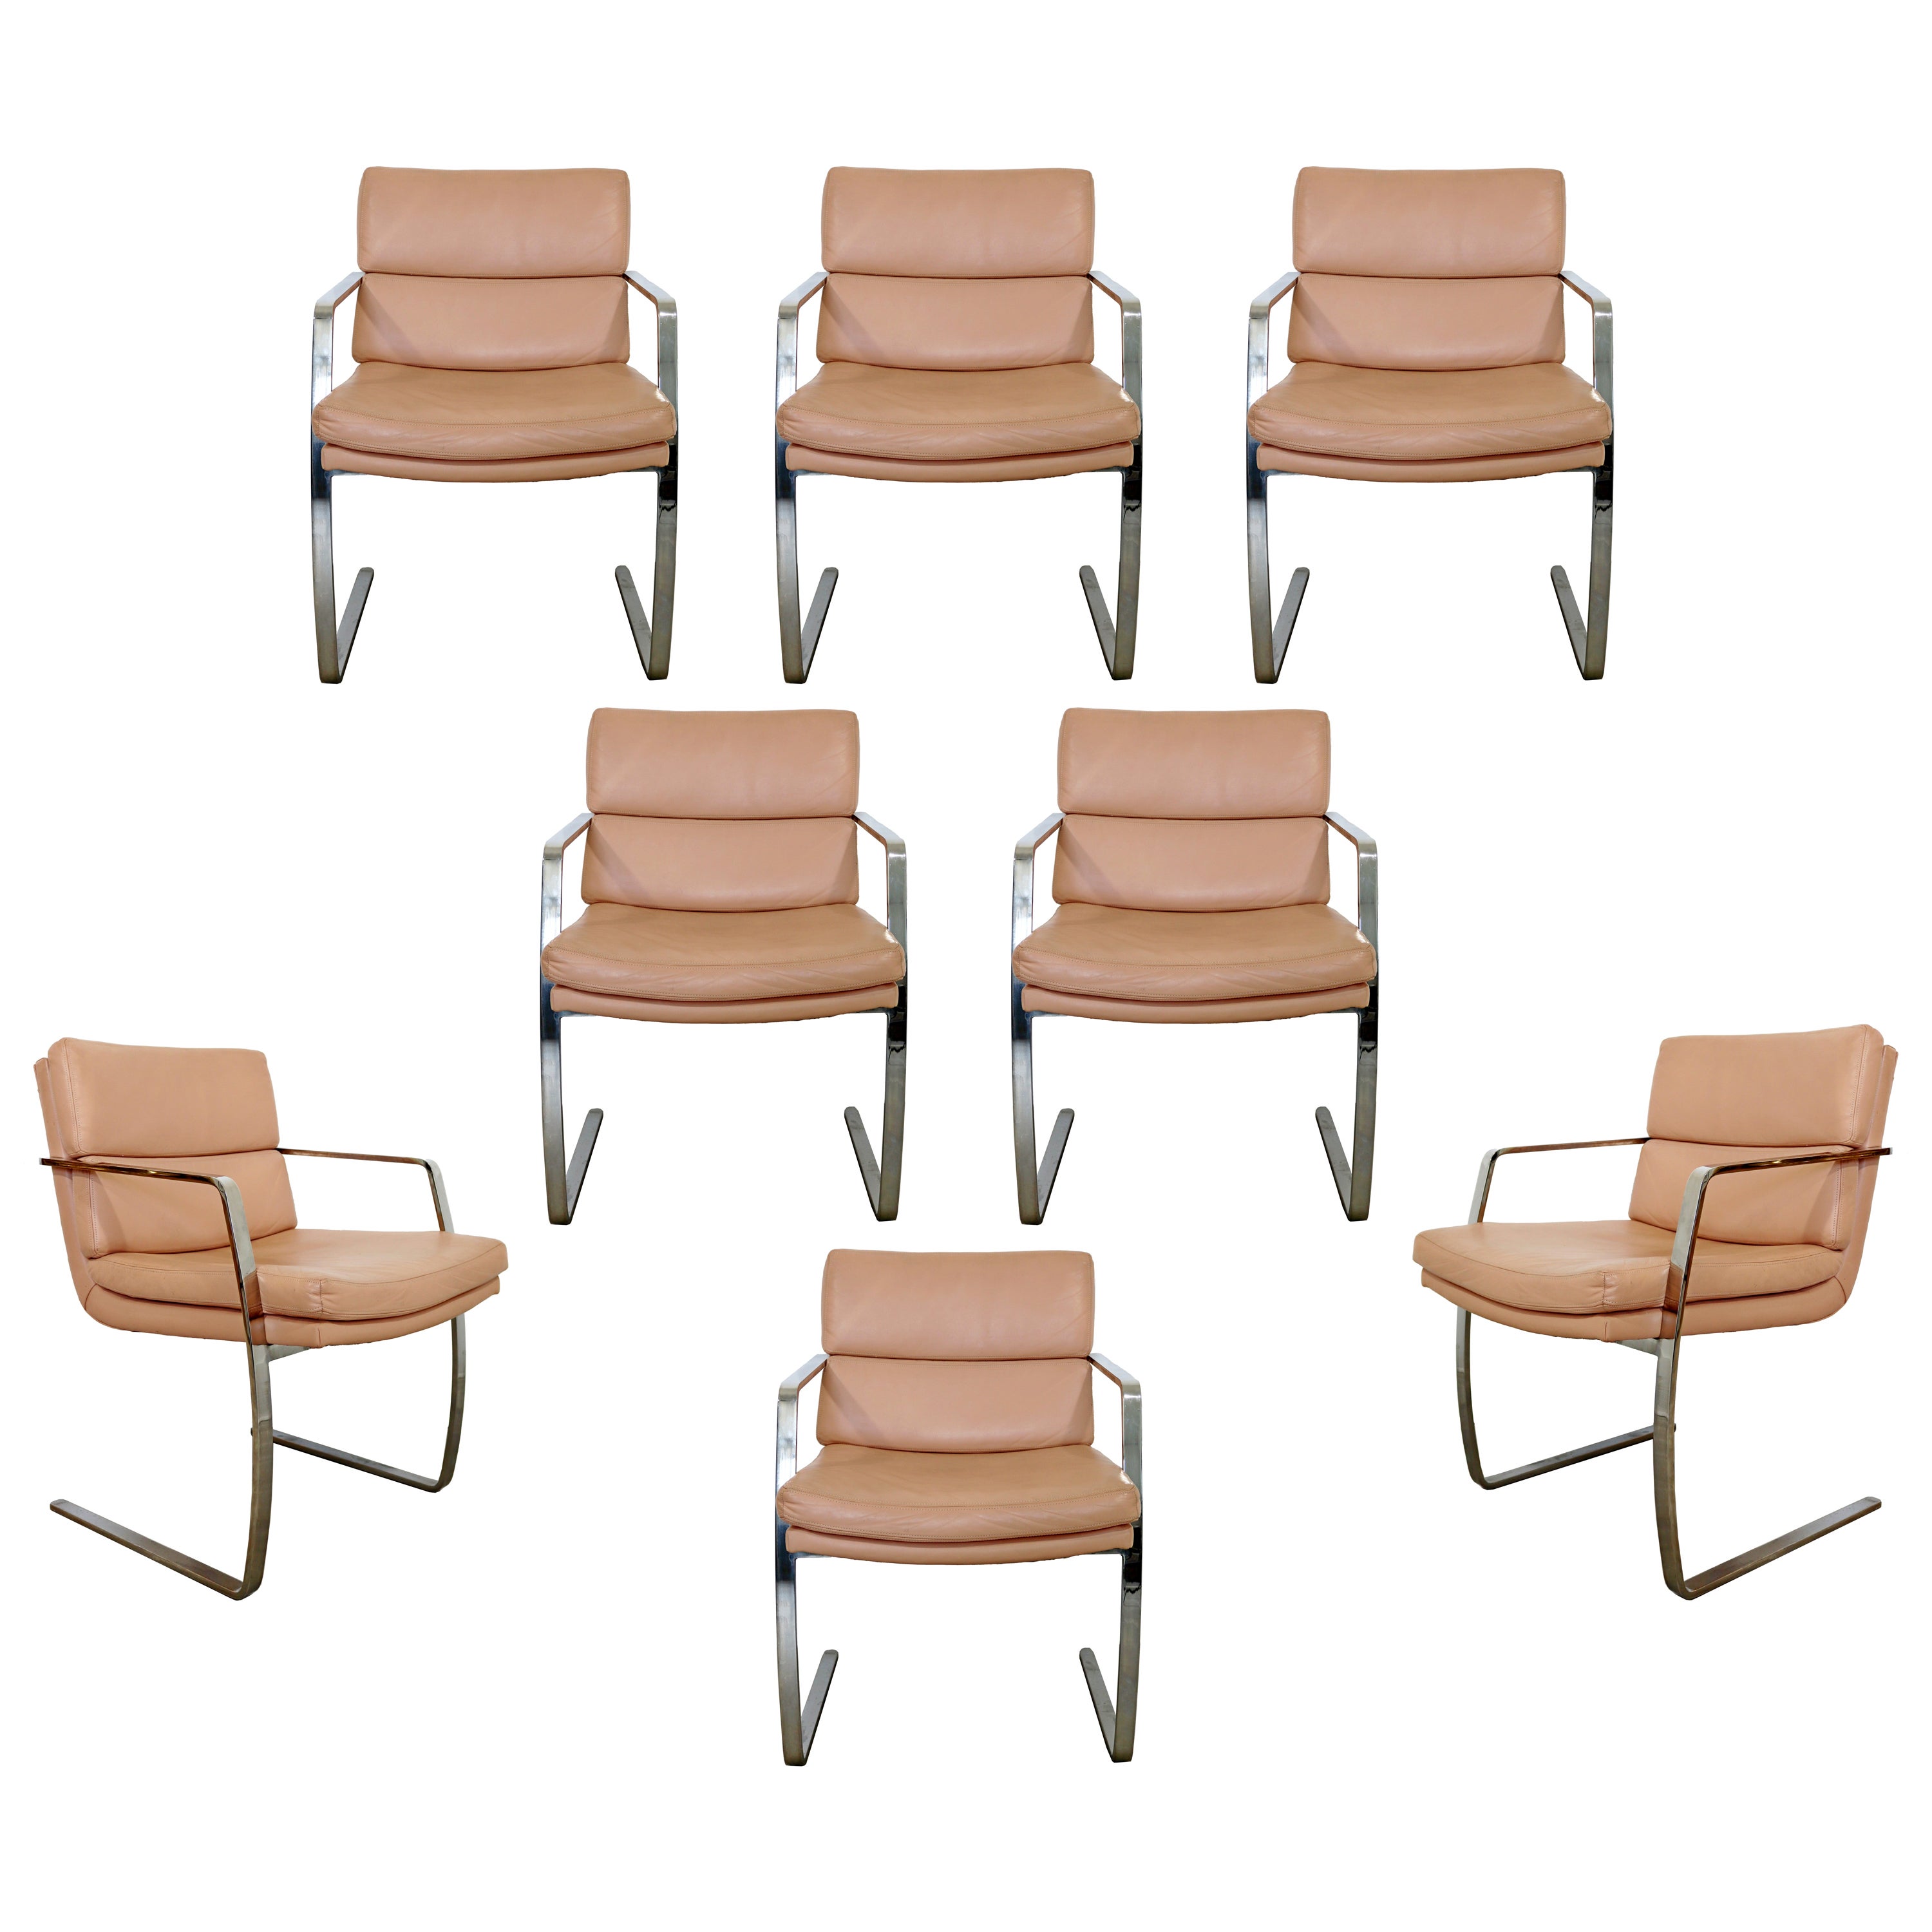 Mid-Century Modern Preview Pace Set of 8 Cantilever Chrome Dining Chairs, 1970s